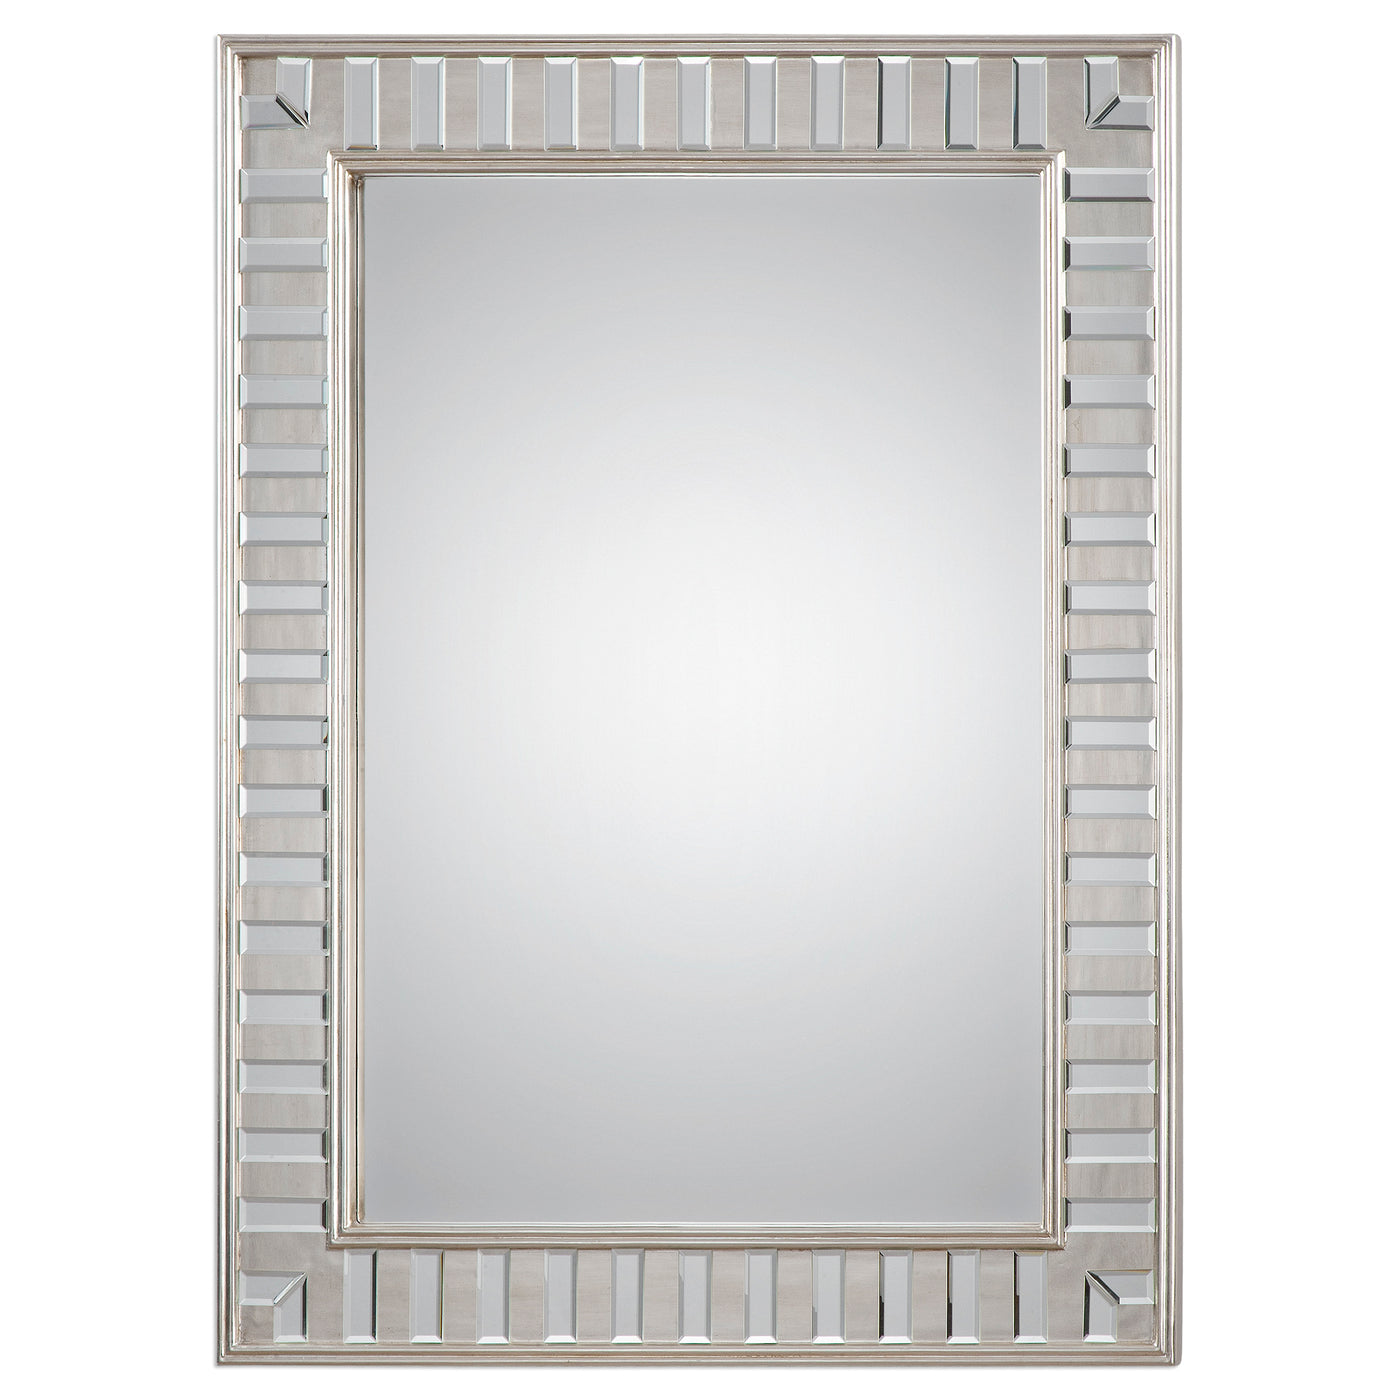 Sleek And Elegant Finishing Touch For Any Room. The Solid Pine Frame Features A Lightly Antiqued Silver Leaf Finish Decora...